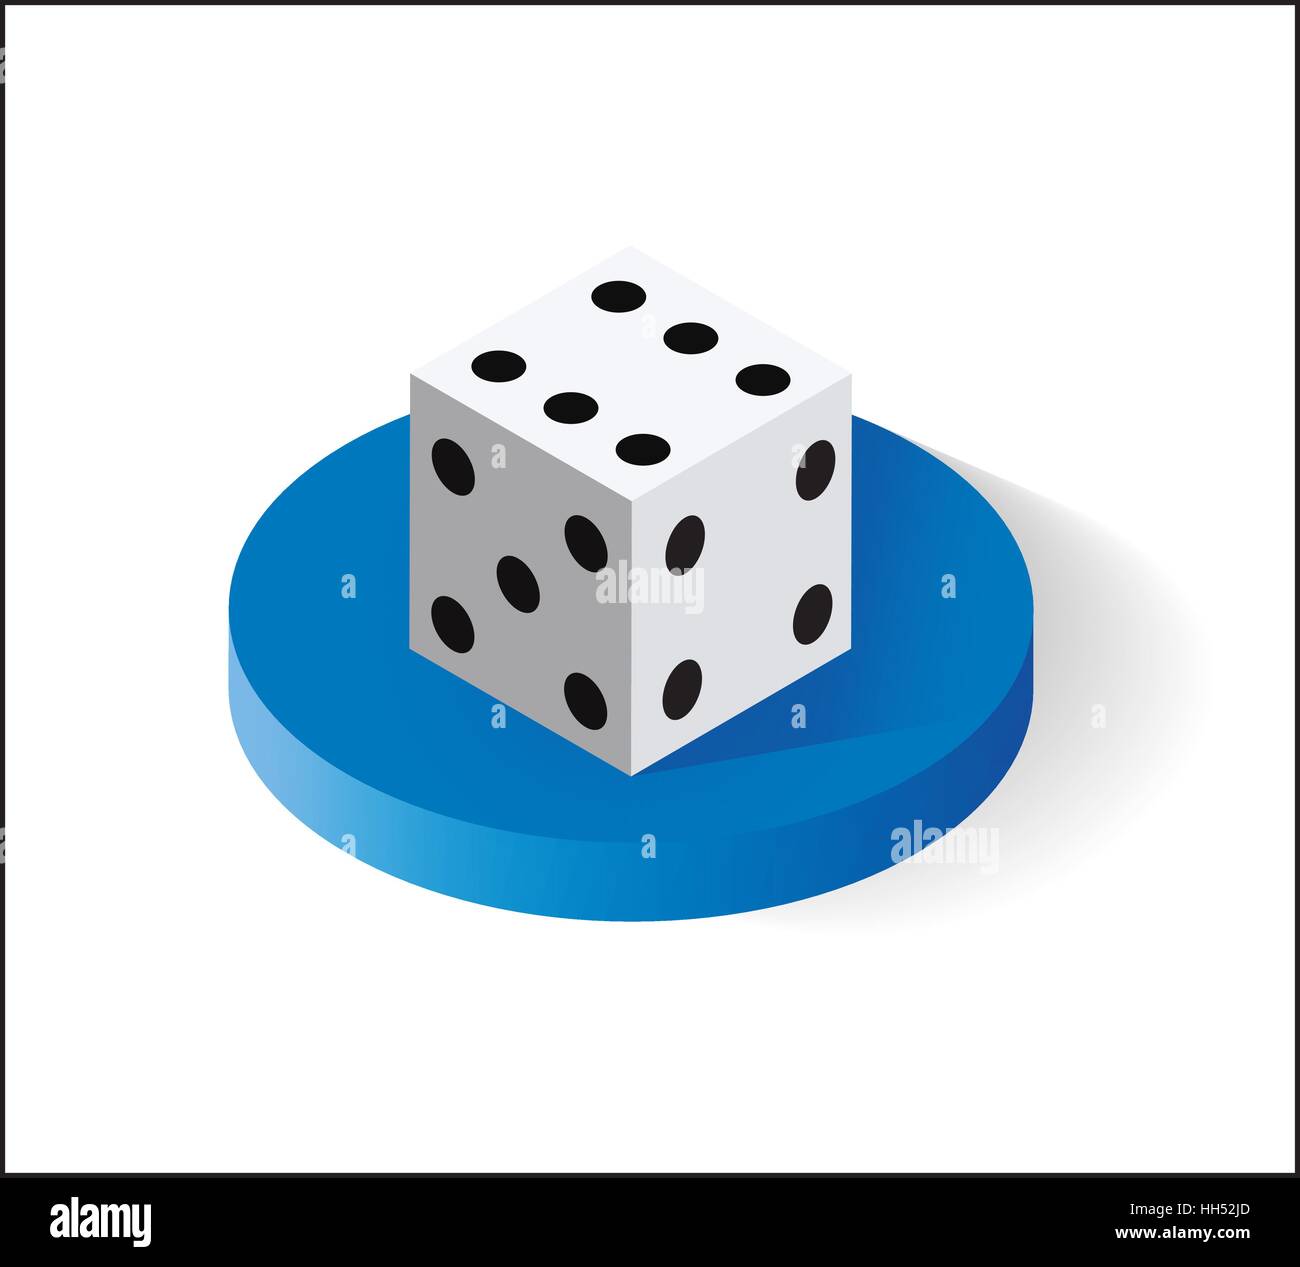 Dice, Isometric icon. Isolated on white background. Vector illustration. Stock Vector